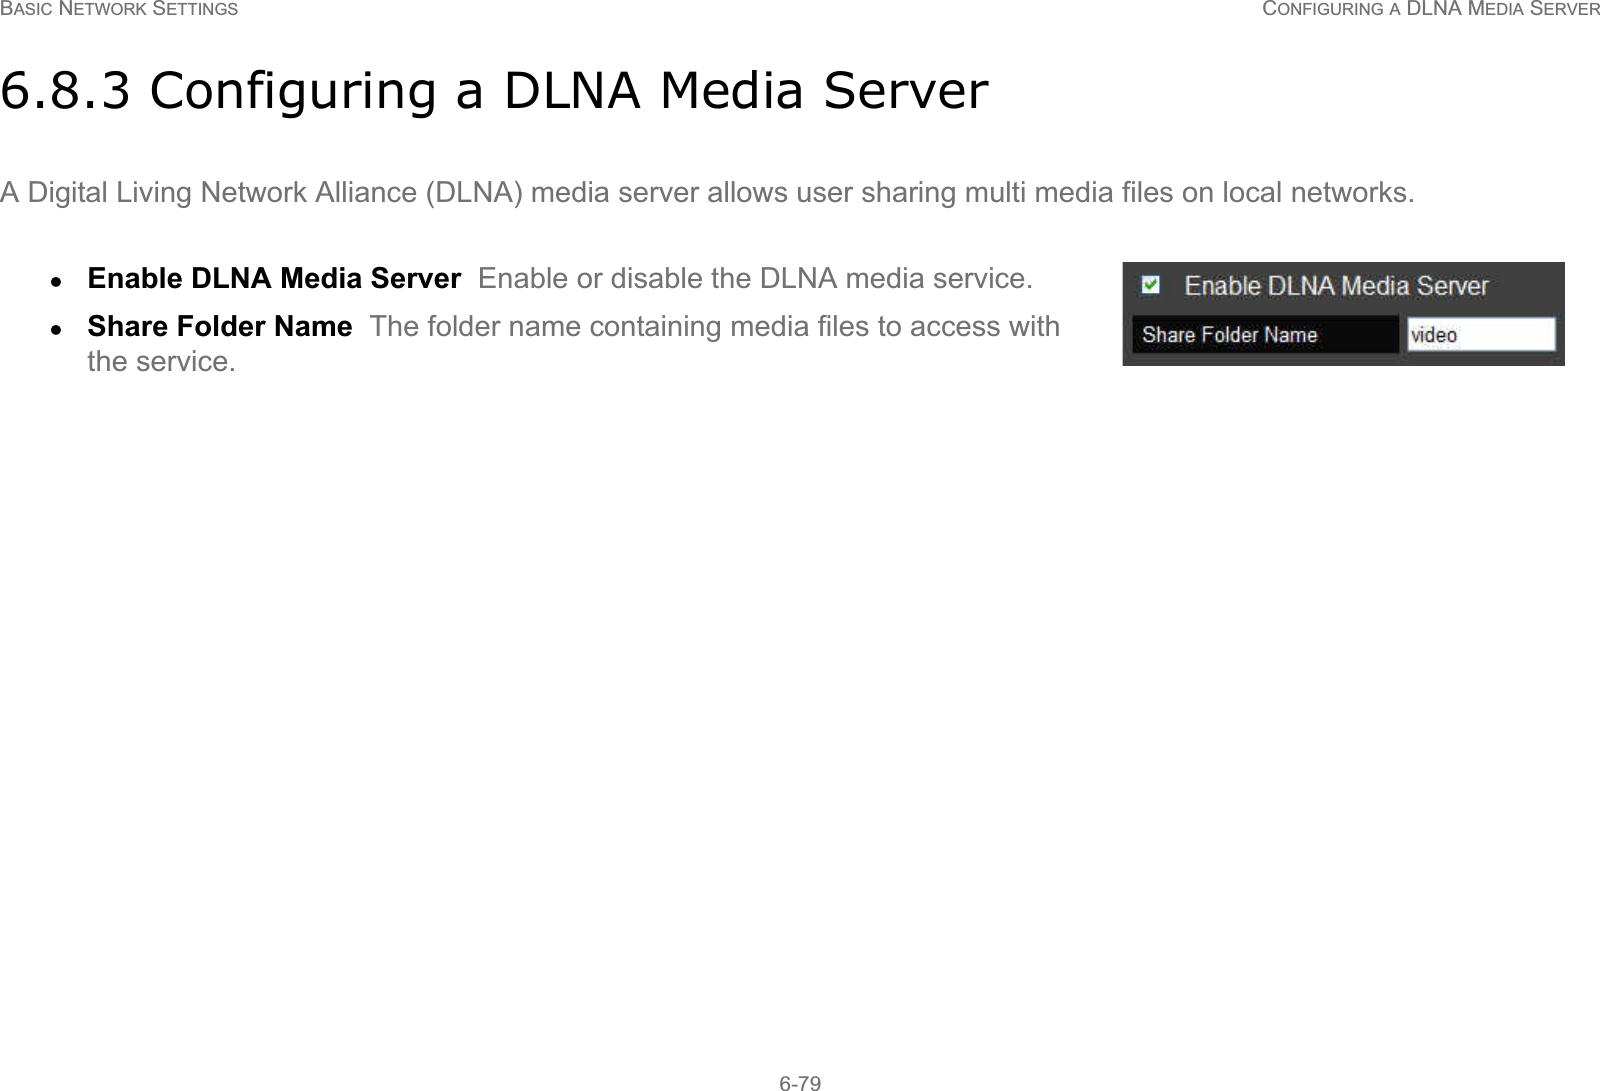 BASIC NETWORK SETTINGS CONFIGURING A DLNA MEDIA SERVER6-796.8.3 Configuring a DLNA Media ServerA Digital Living Network Alliance (DLNA) media server allows user sharing multi media files on local networks.zEnable DLNA Media Server  Enable or disable the DLNA media service.zShare Folder Name  The folder name containing media files to access with the service.